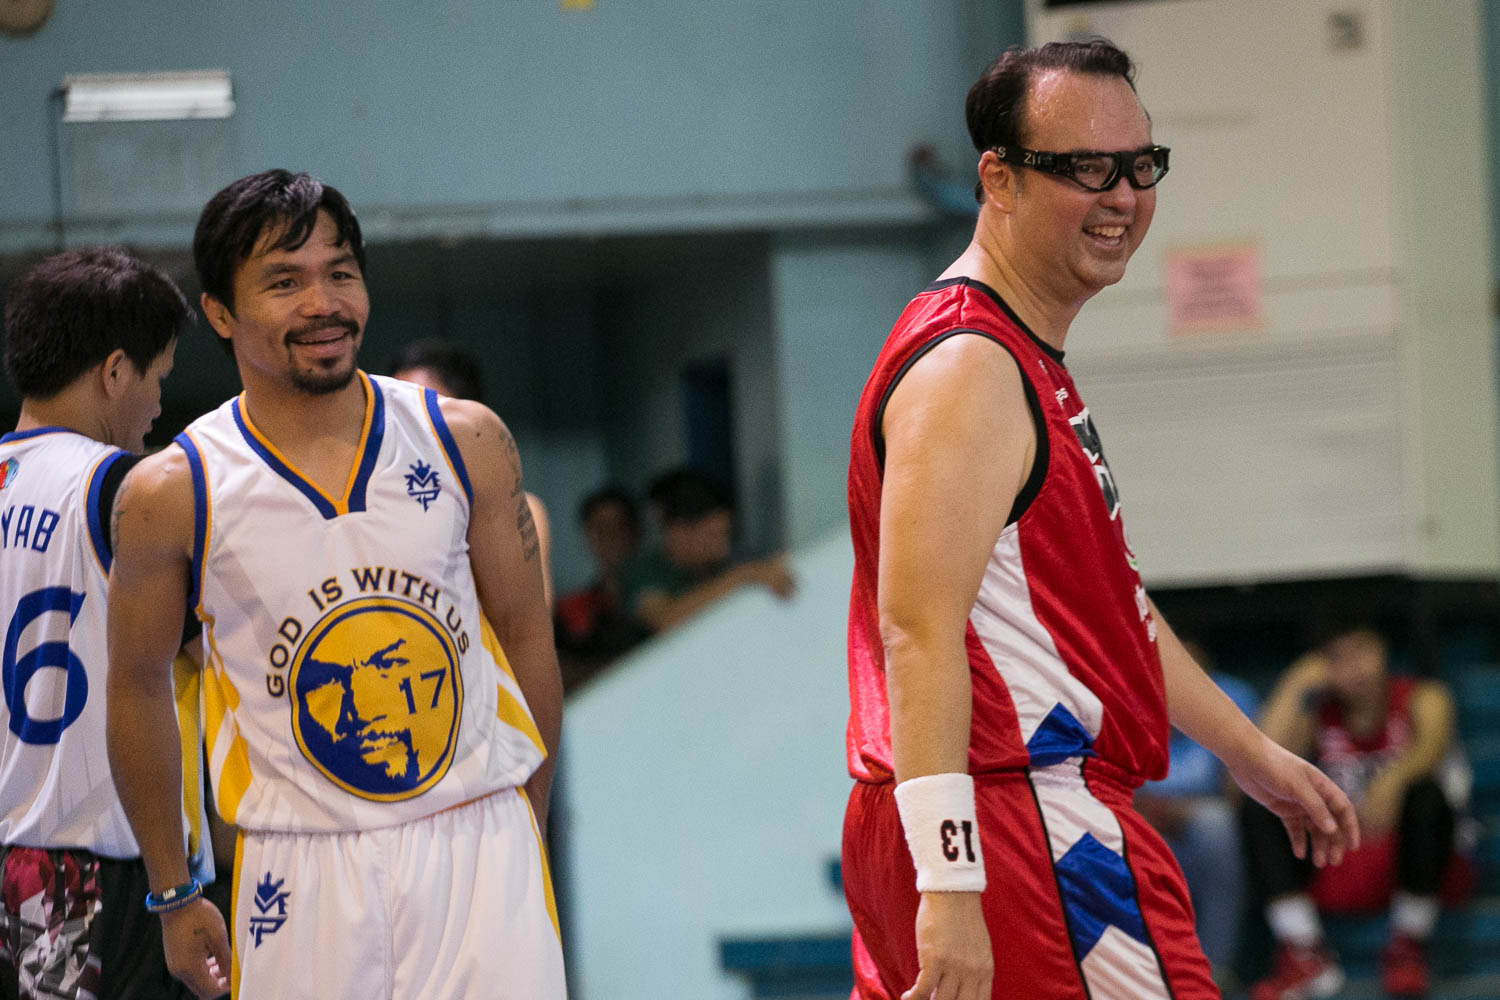 FRIENDLY GAME. The incoming lawmaker and boxing champion spent the morning of Saturday, May 28, playing basketball with Senator Alan Peter Cayetano. Photo by Manman Dejeto/Rappler 